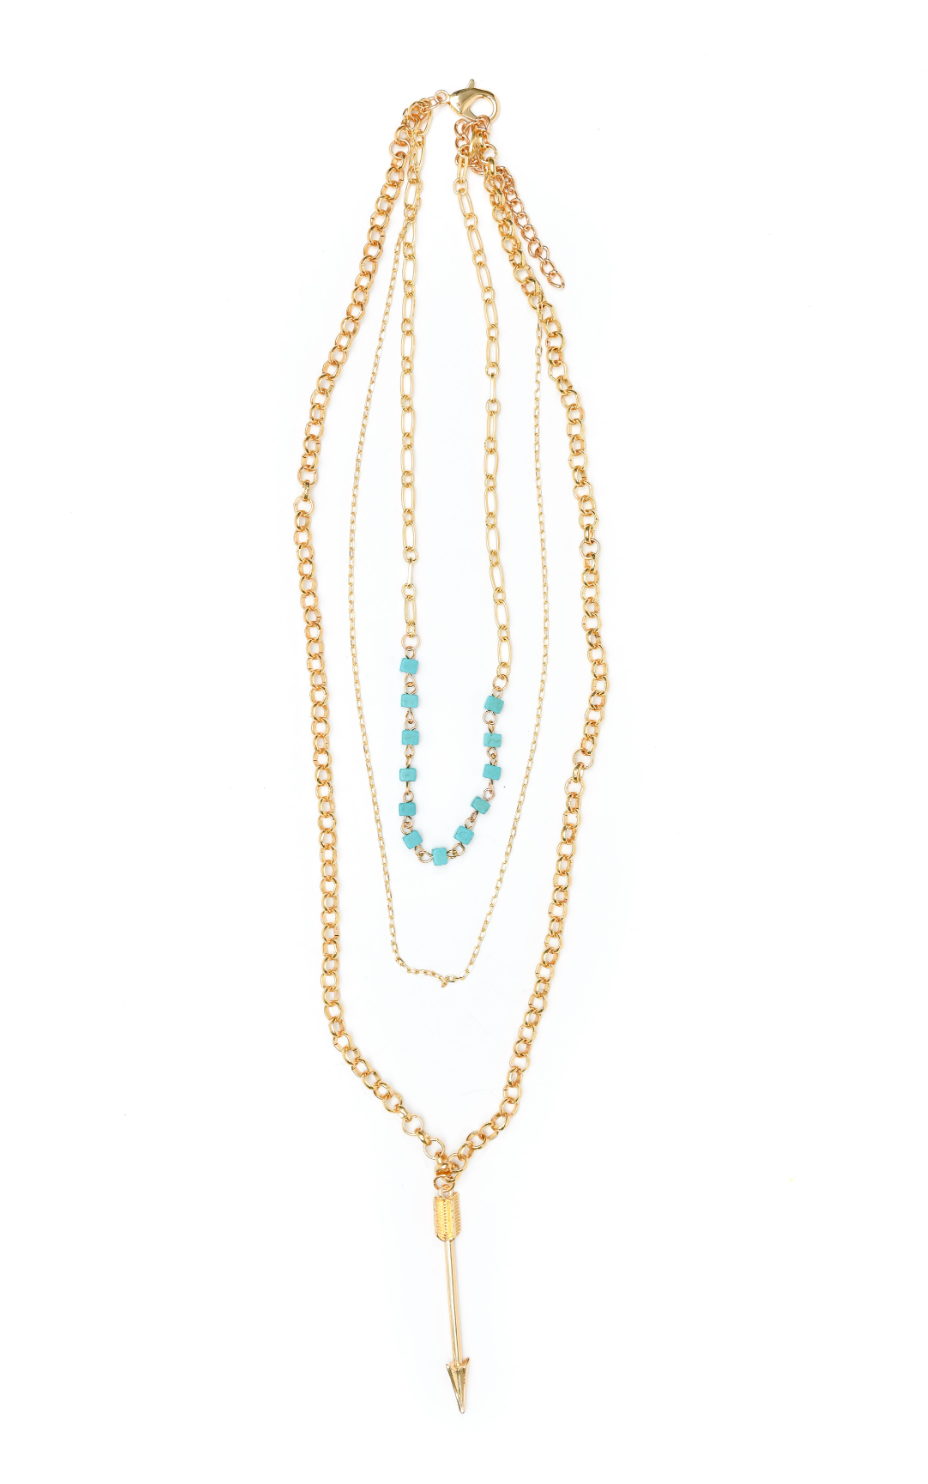 Multi Chain Gold and Turquoise Necklace with Arrow Pendant